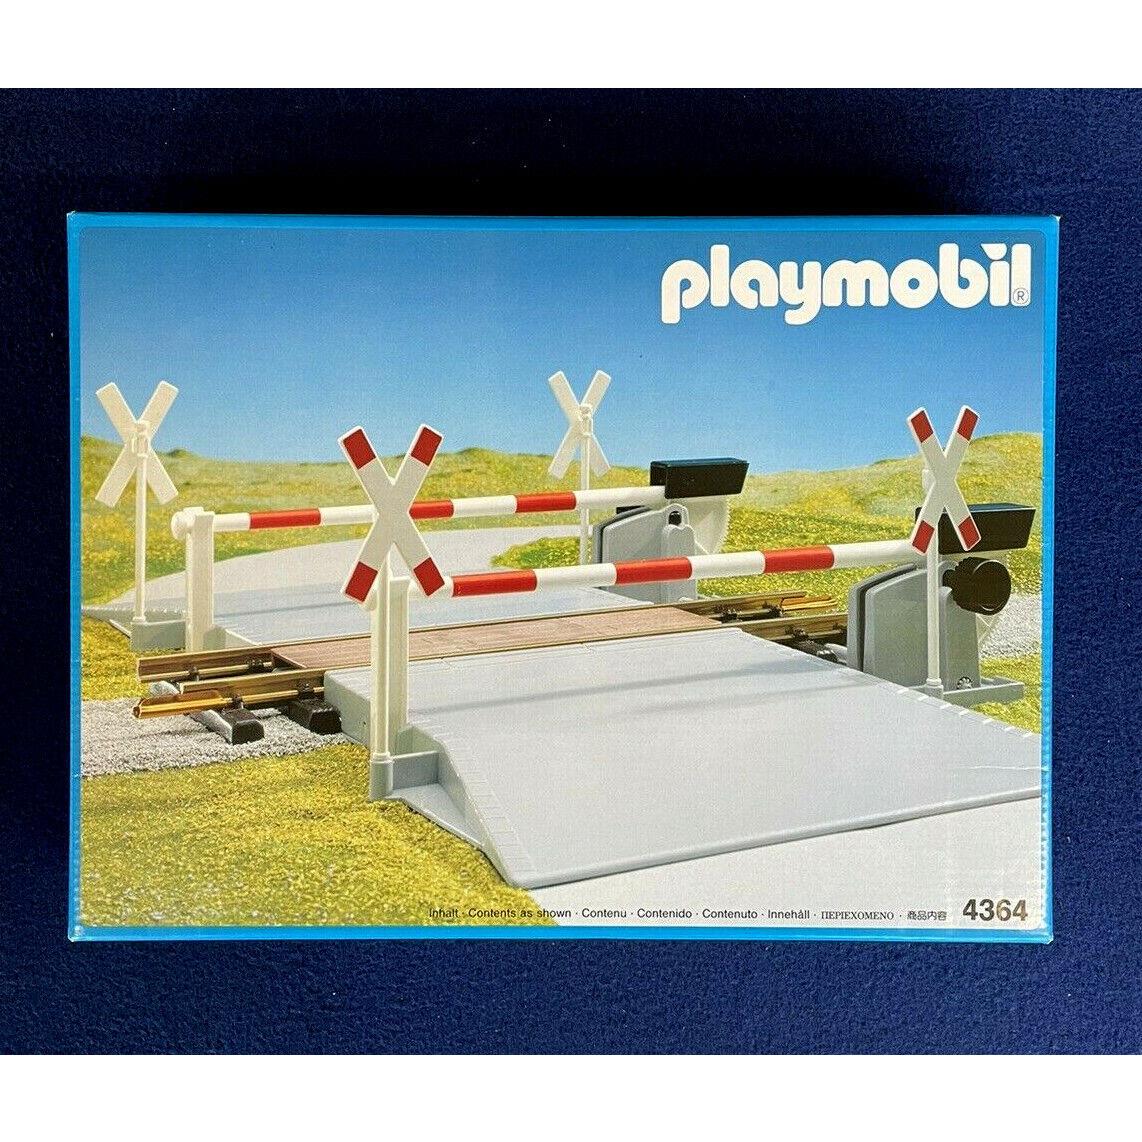 Playmobil 4364 - Level Crossing - Vintage Mint Boxed From 1994